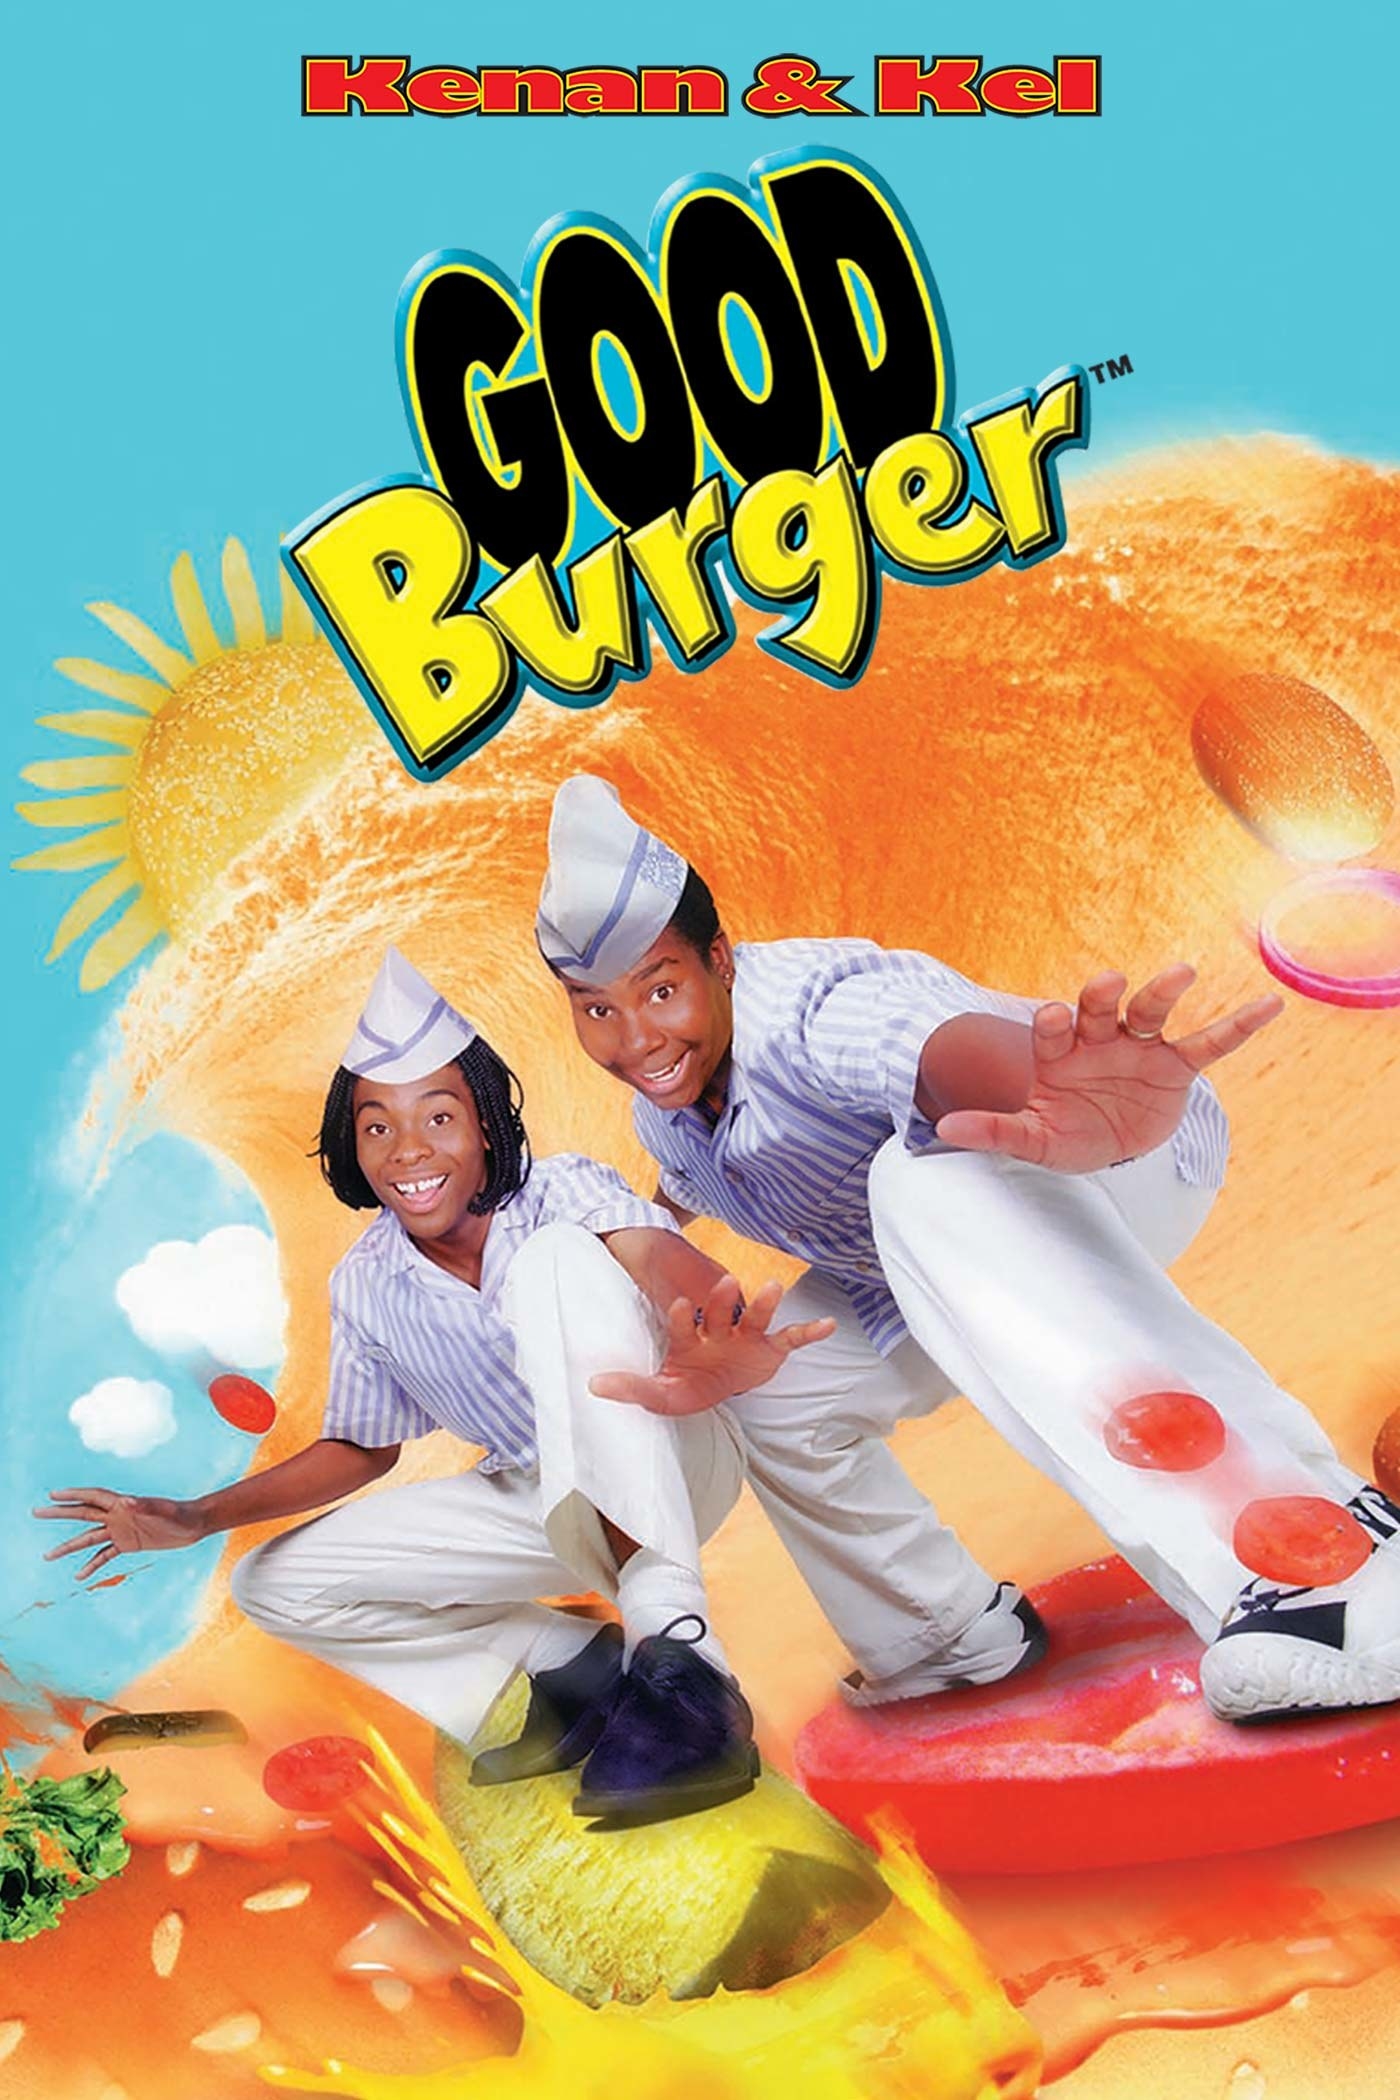 Movie poster for Good Burger